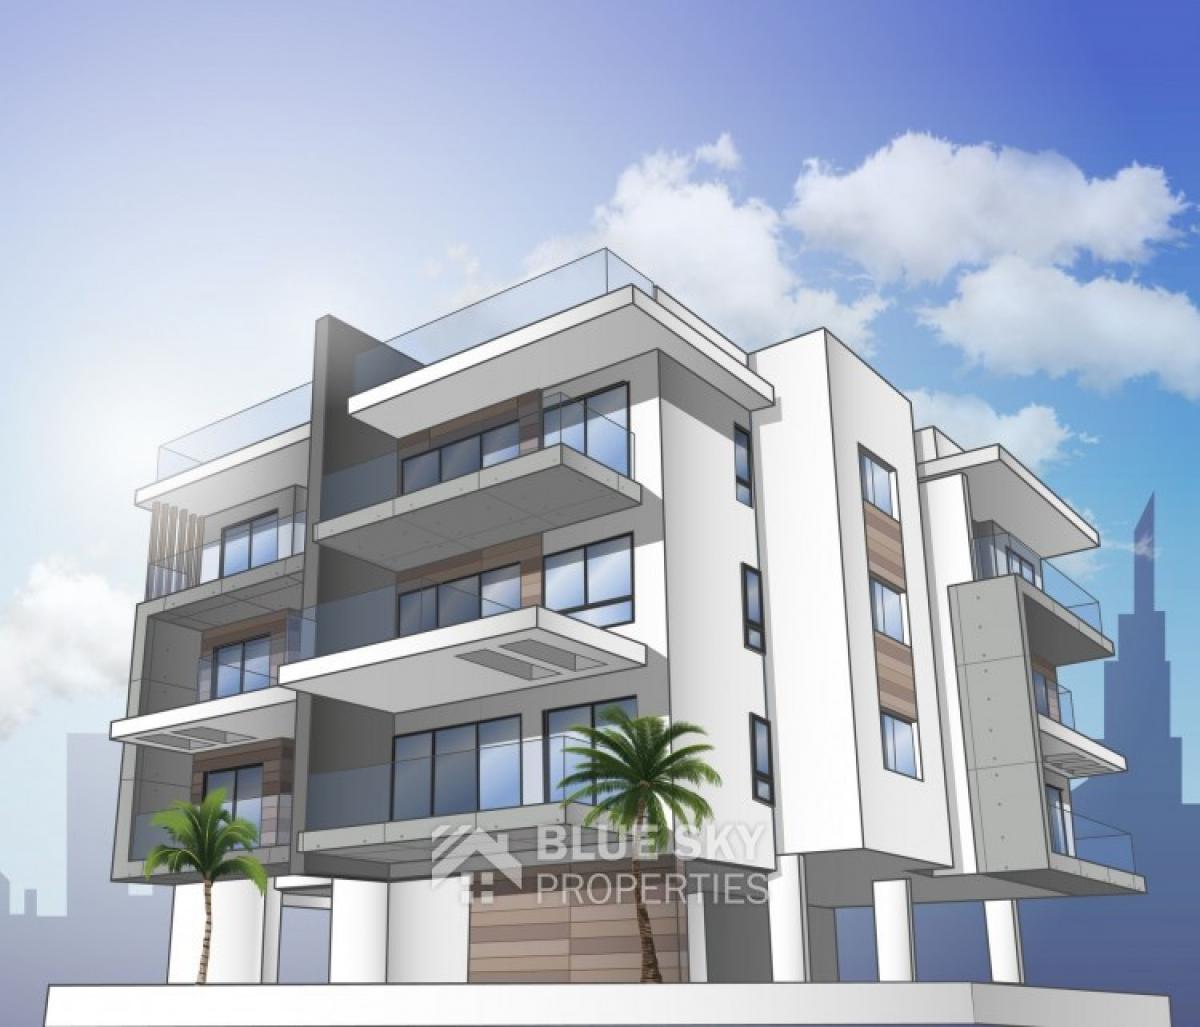 Picture of Apartment For Sale in Omonoia, Limassol, Cyprus